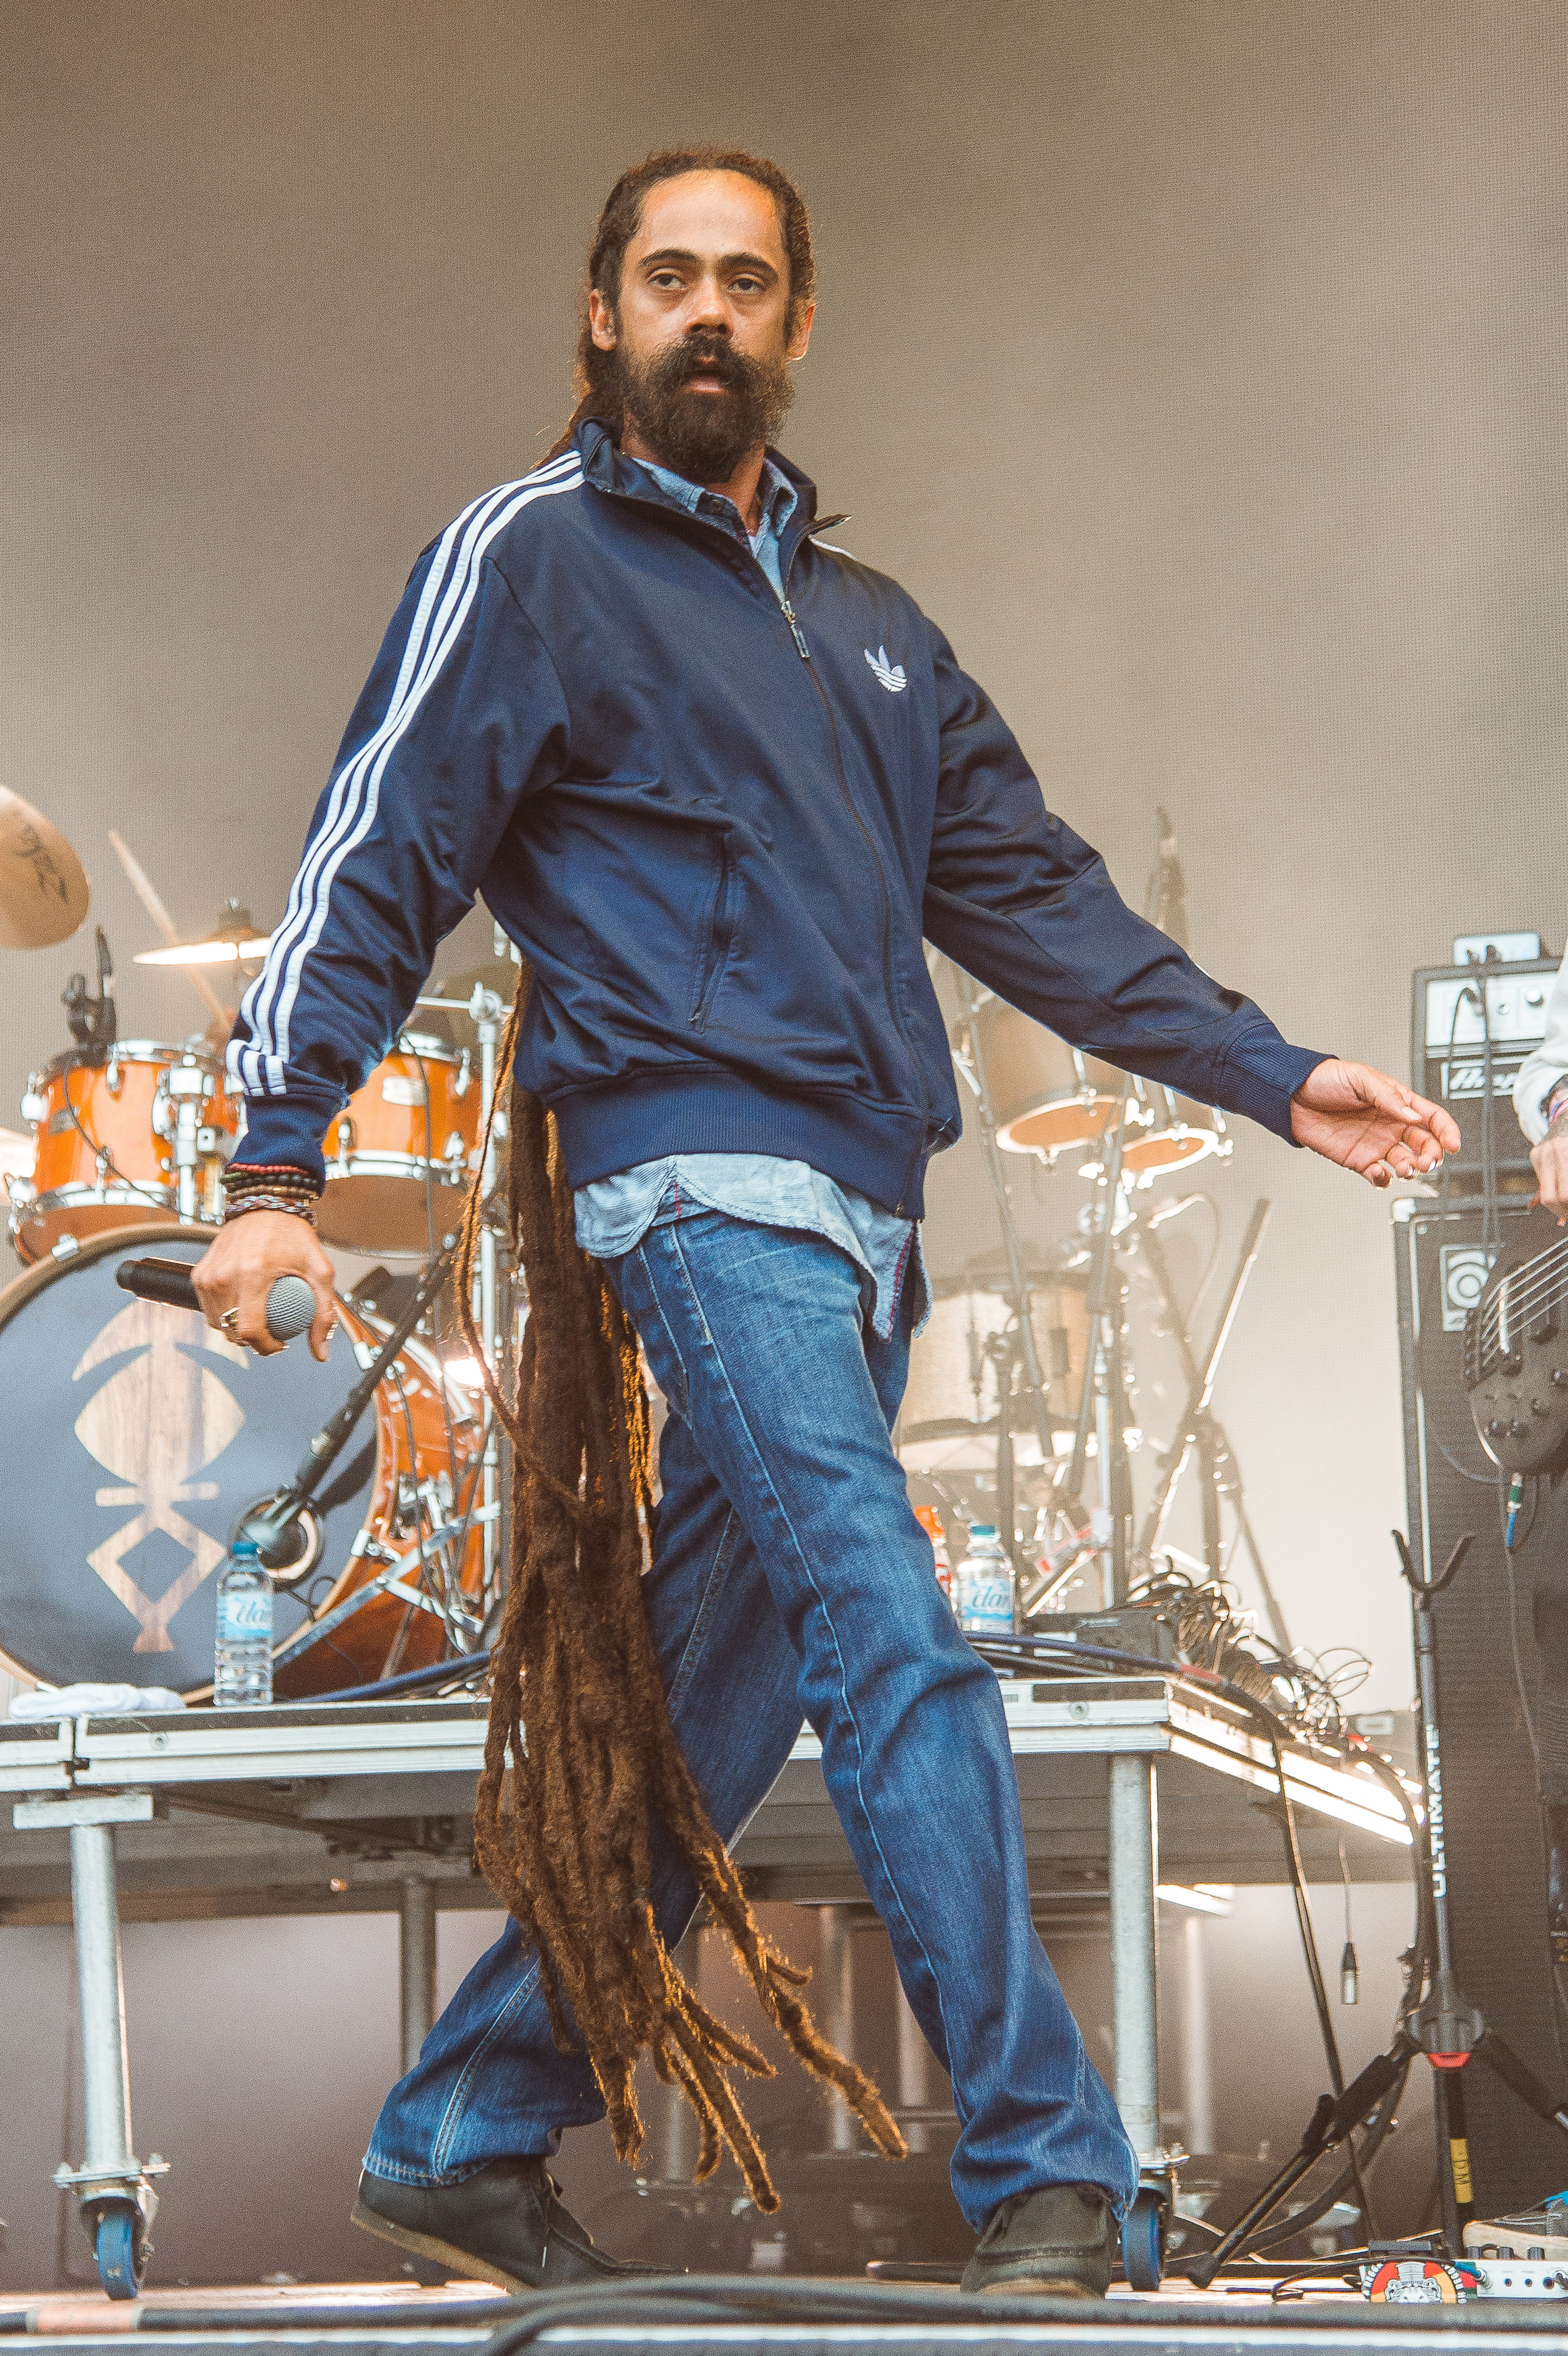 Damian Marley performs on stage at The Ends Festival at Lloyd Park on June 2, 2019 in Croydon, England. | Source: Getty Images